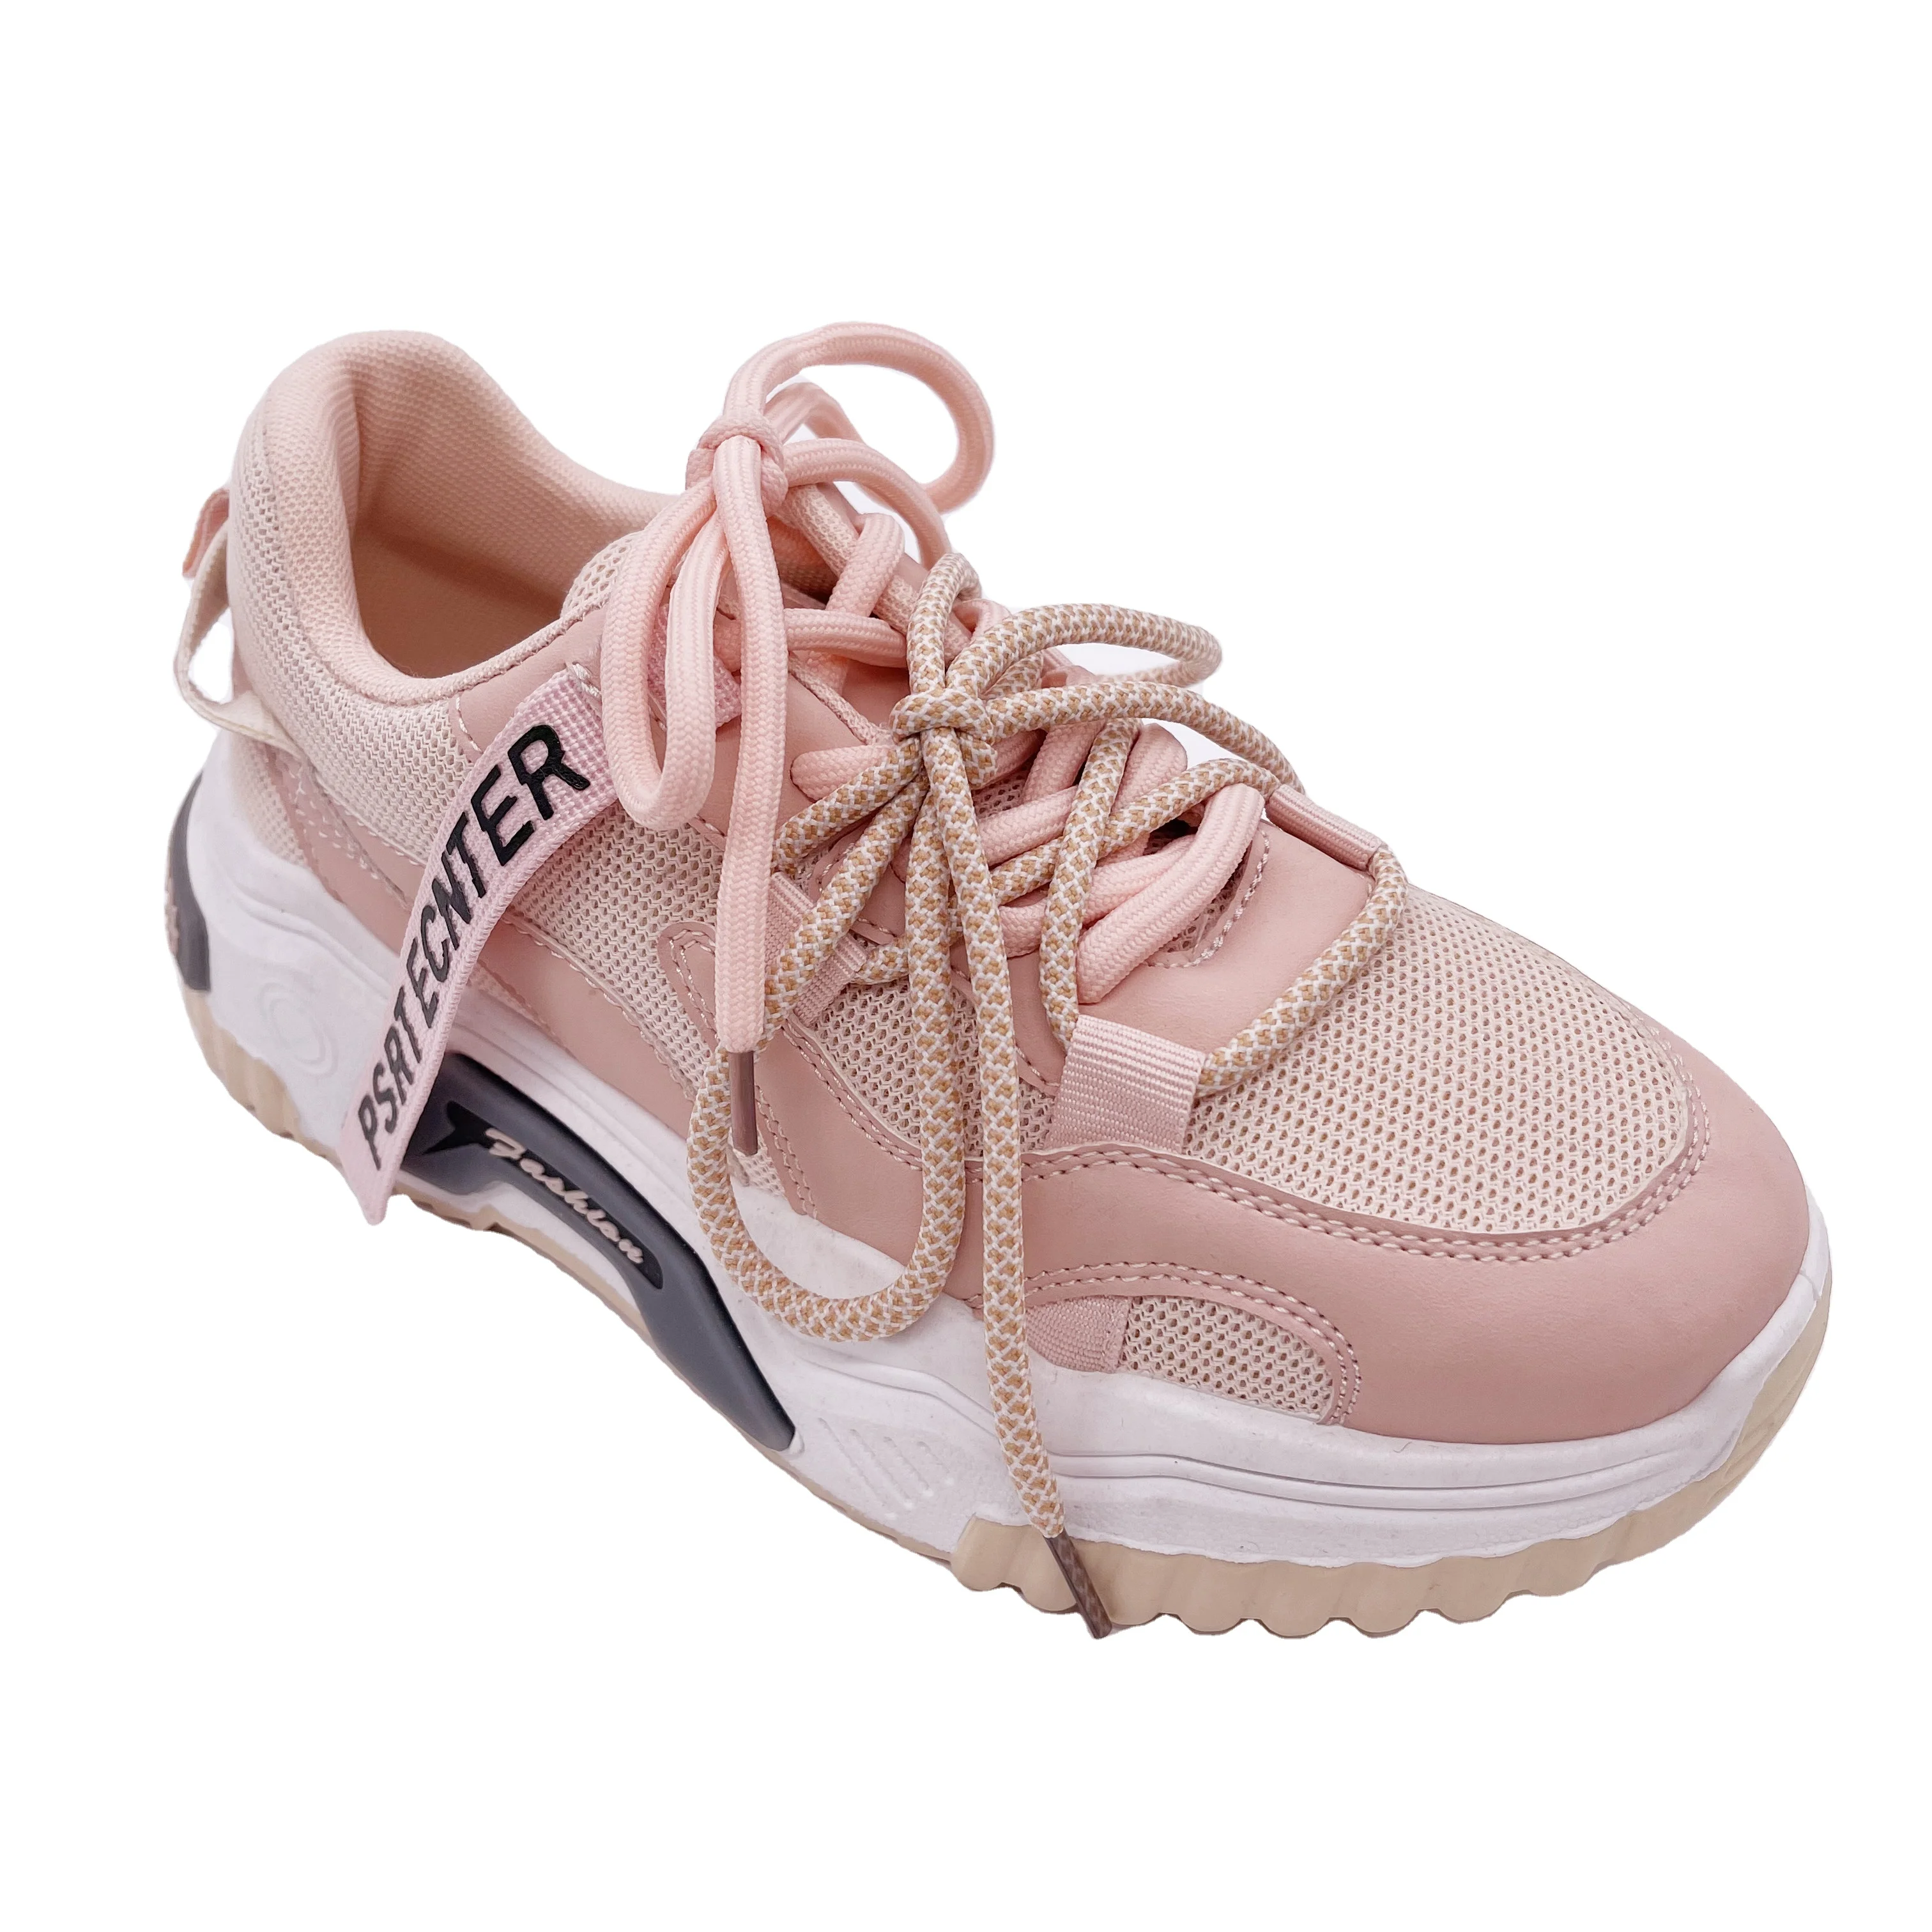 Women's walking style breathable running shoes sport shoes